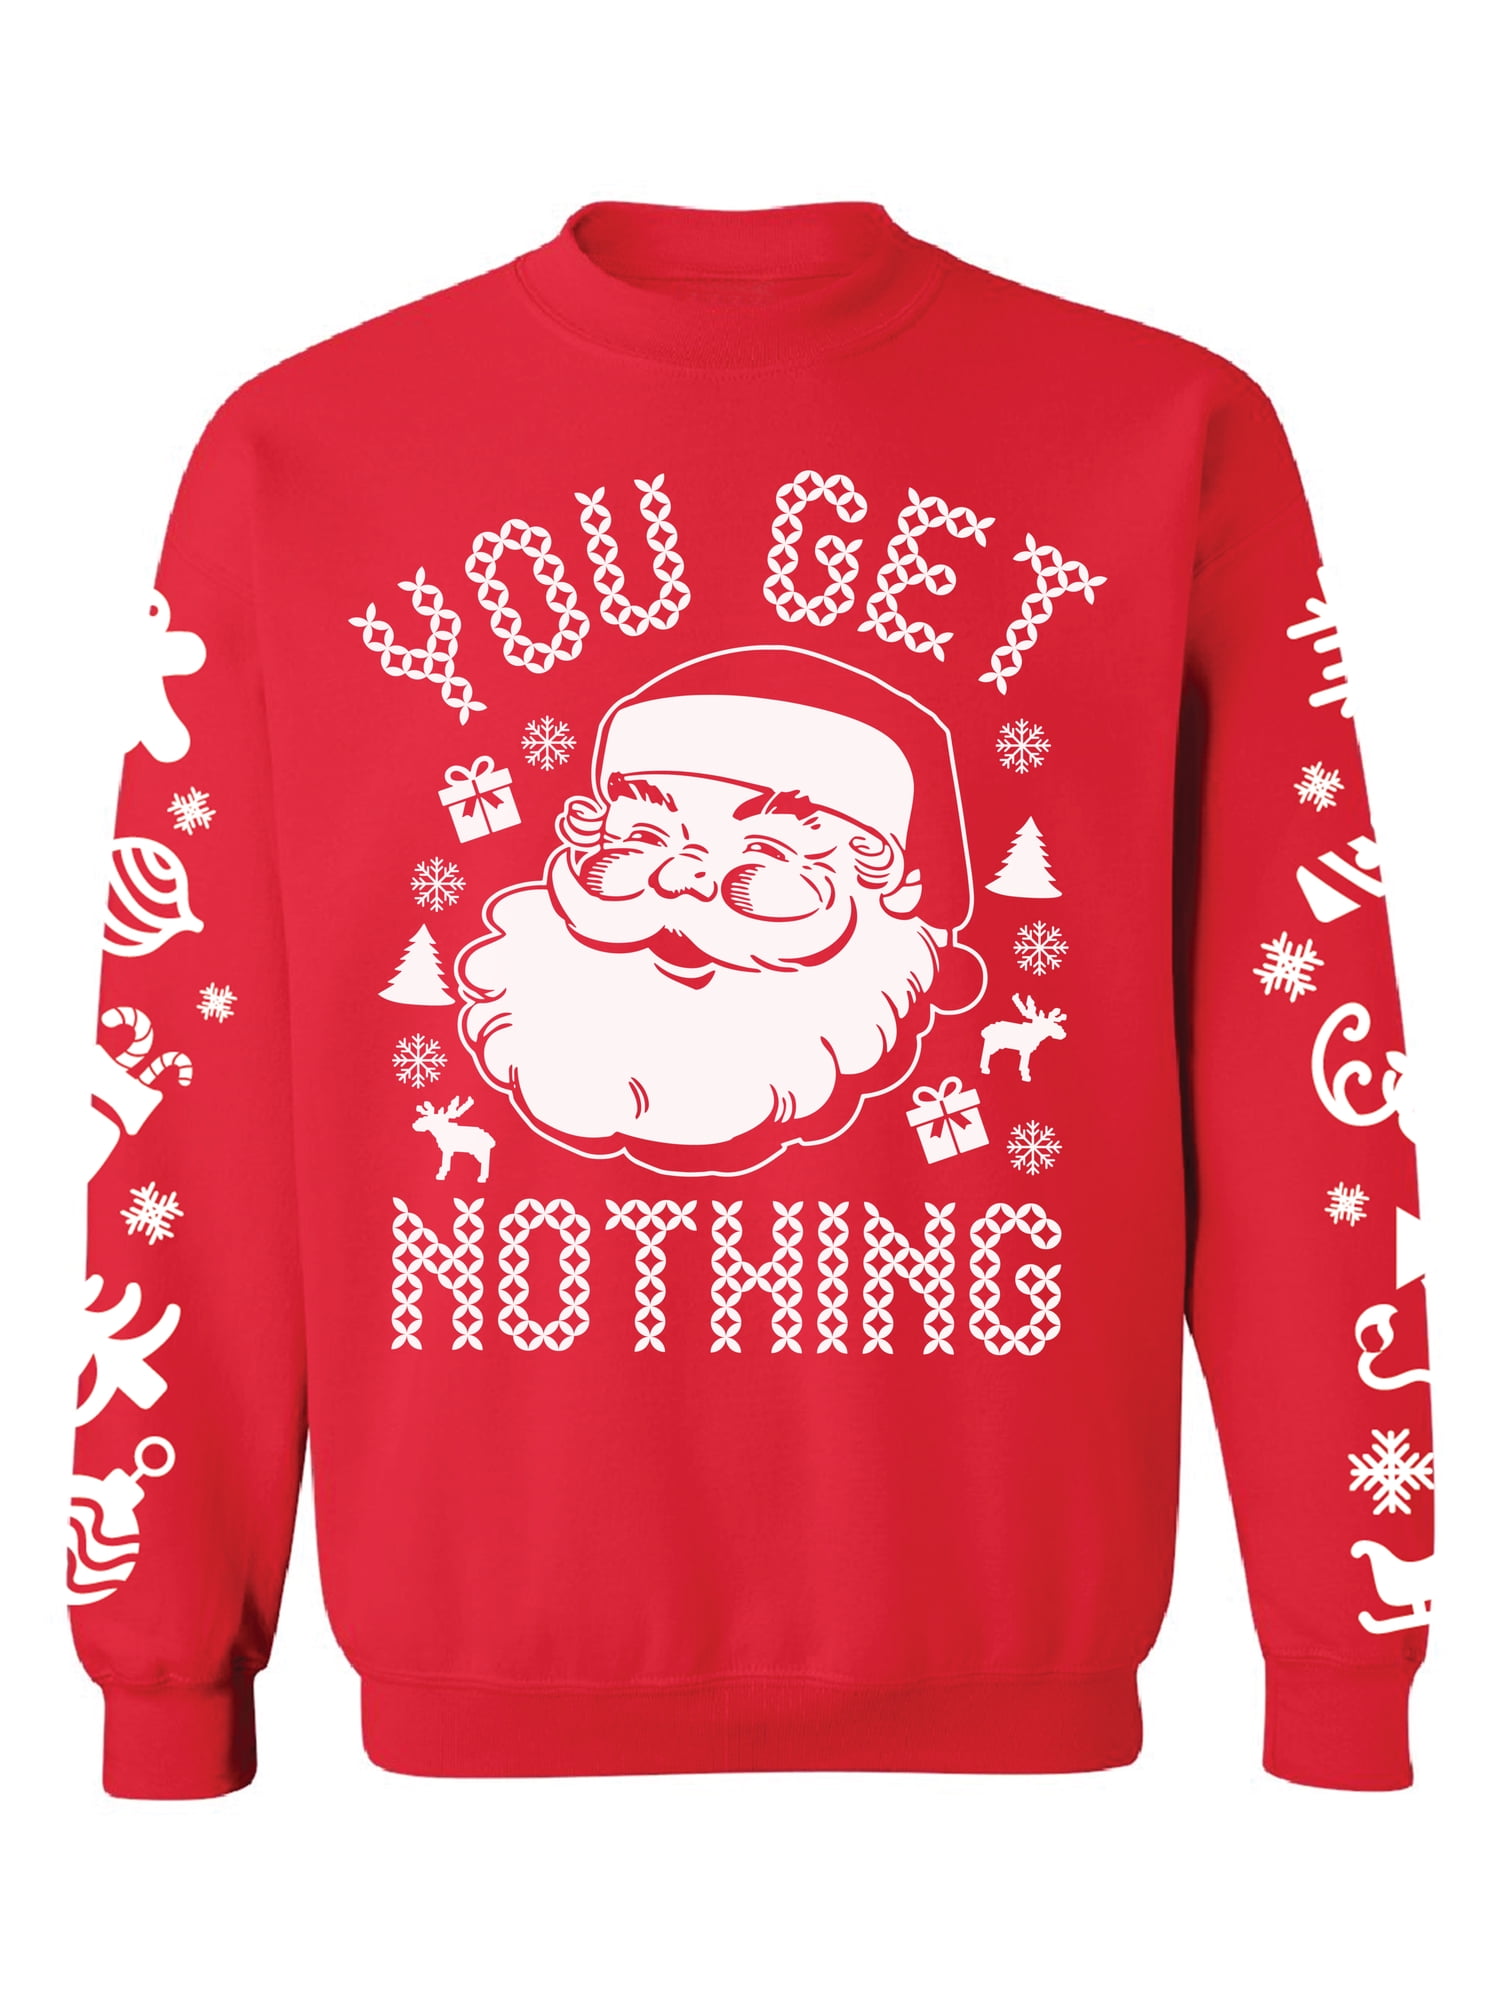 Awkward Styles You Get Nothing Christmas Sweatshirt Santa Claus Sweater  with White Sleeves Funny Christmas Gifts Ugly Christmas Santa Sweater  Holiday 